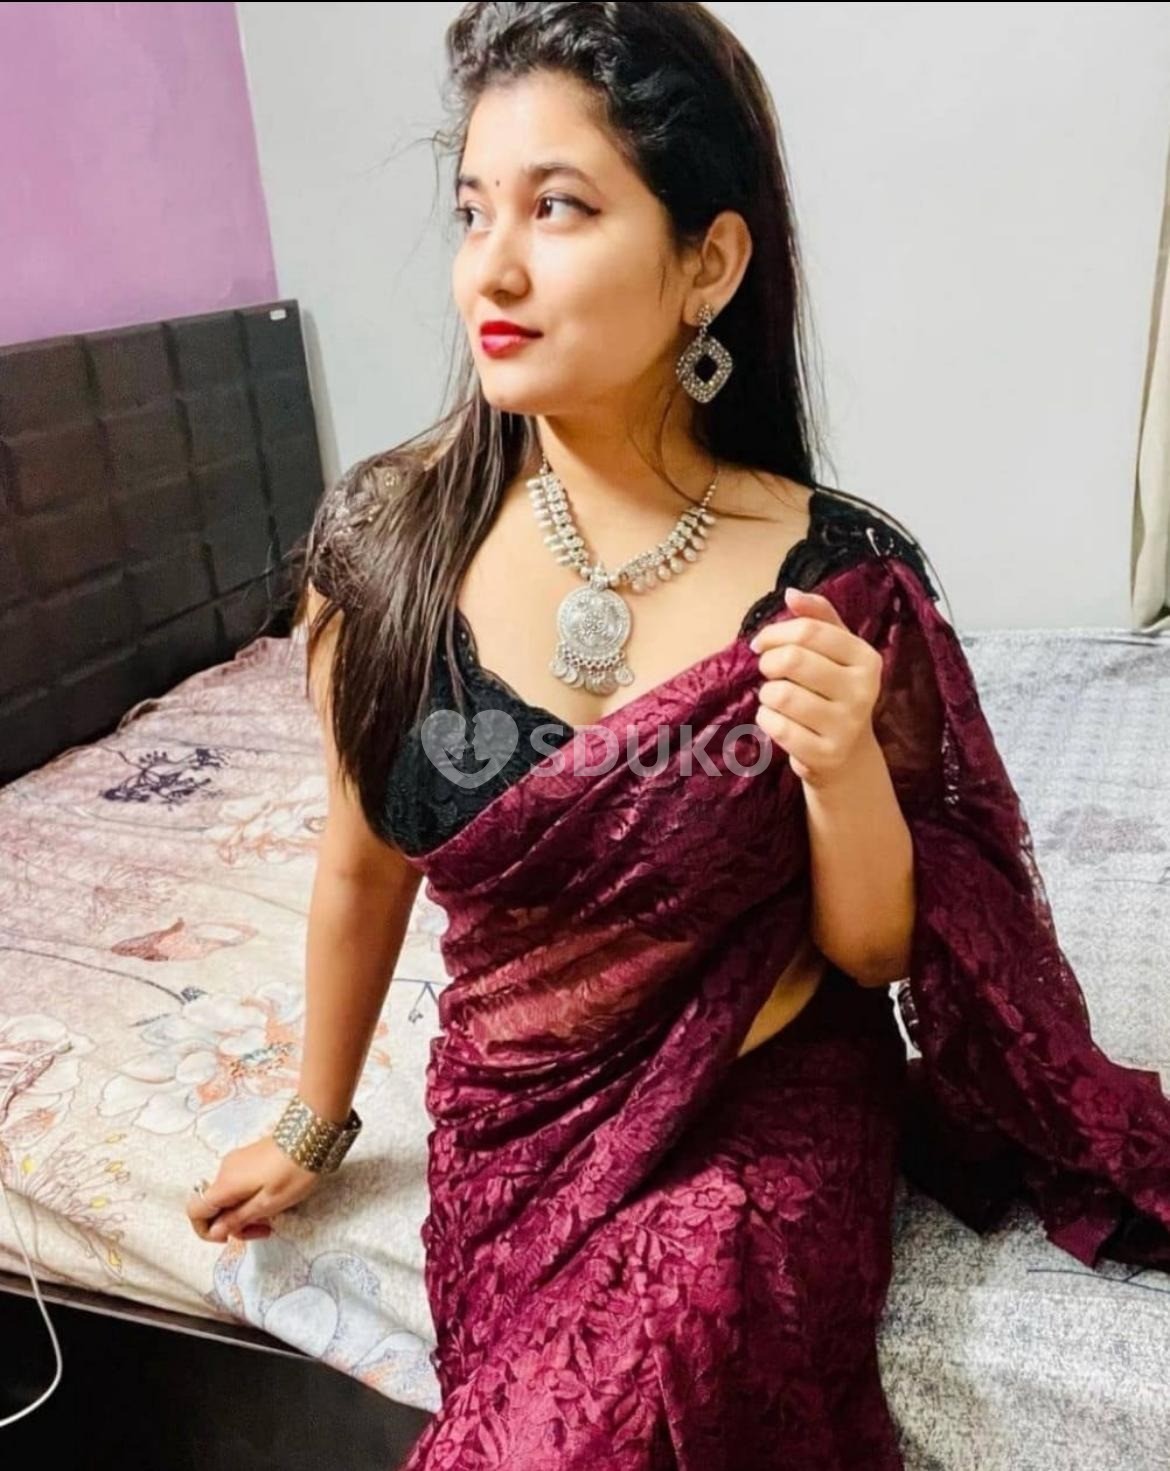 BALASORE TODAY AVAILABLE FULL 100% SAFE AND SECURE TODAY LOW PRICE UNLIMITED ENJOY HOT COLLEGE GIRL HOUSEWIFE AUNTIES AV